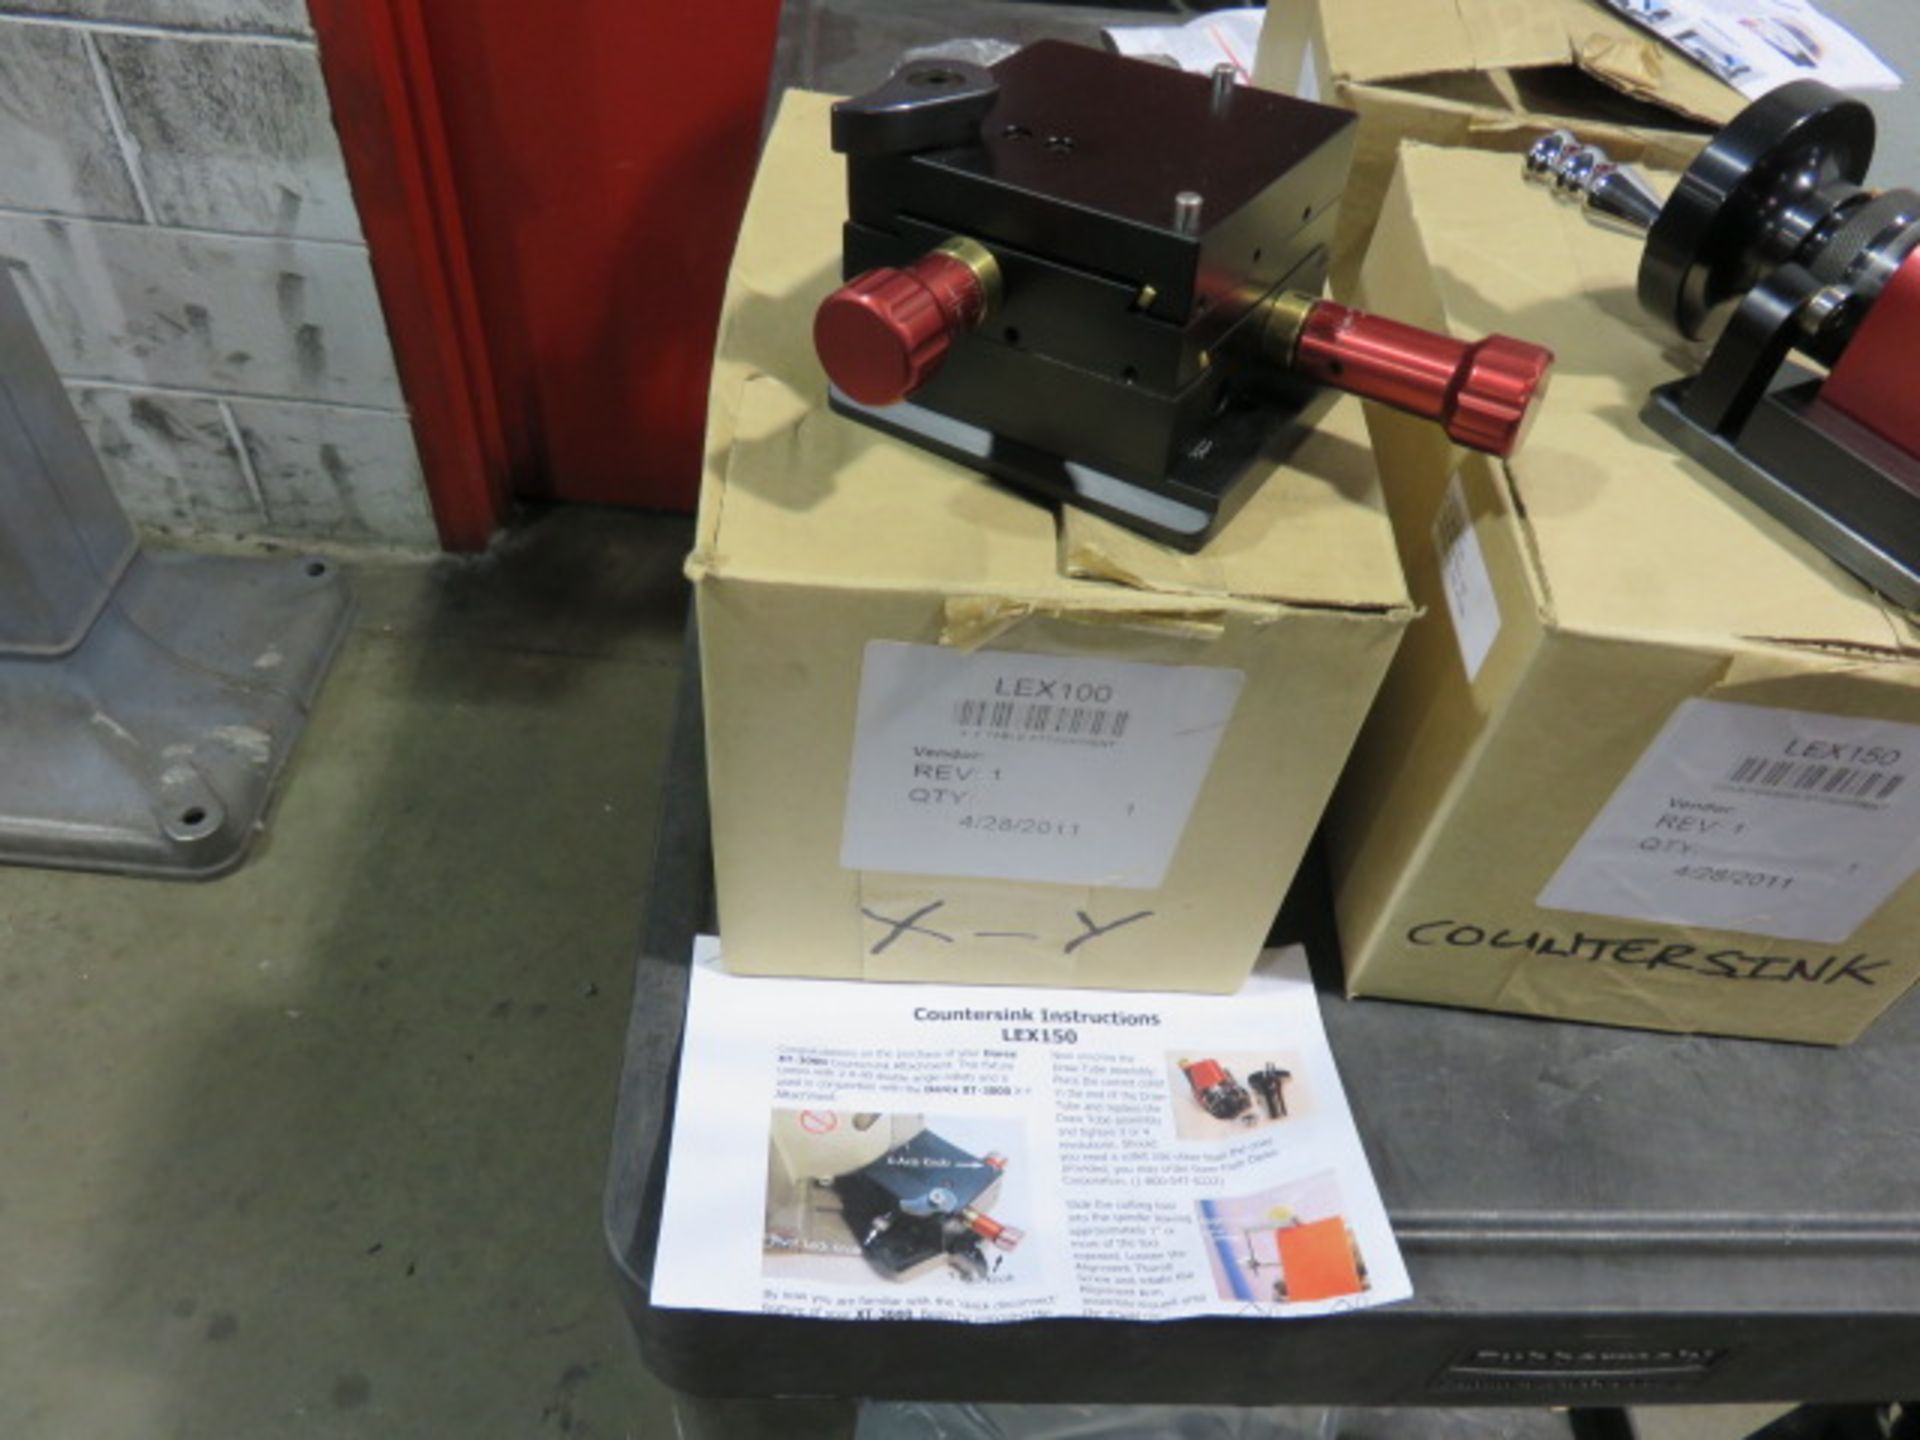 2011 DAREX XT 3000 EXPANDABLE TOOL SHARPENER, S/N 12007606, LEX150 COUNTERSINK, LEX100 X-Y TABLE - Image 3 of 7